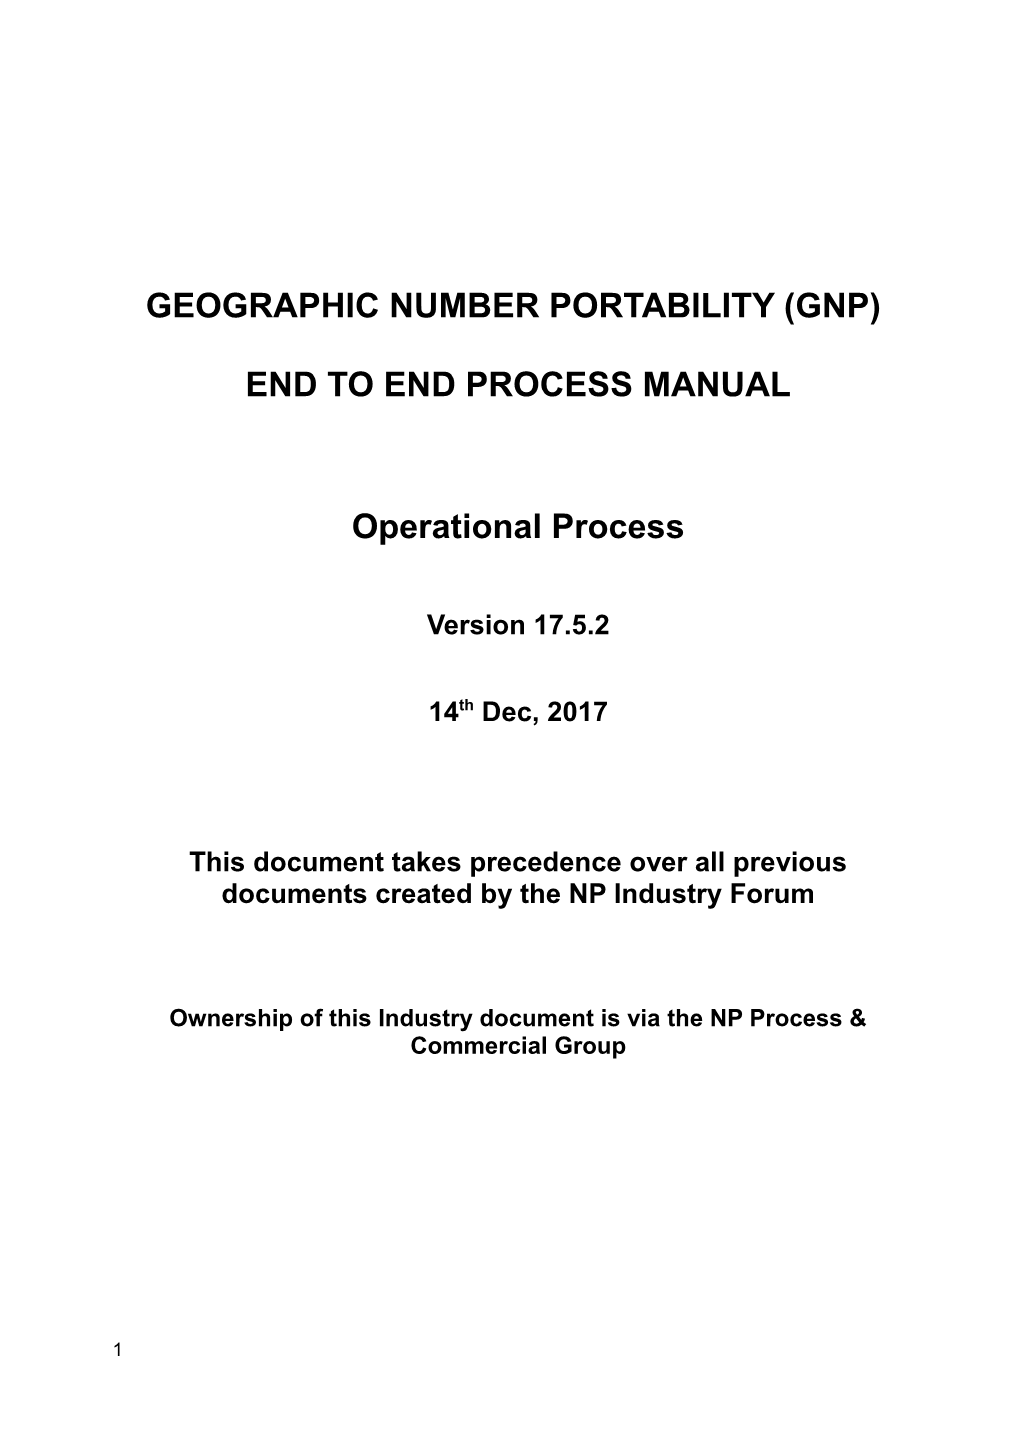 Geographic Number Portability (Gnp) End to End Process Manual